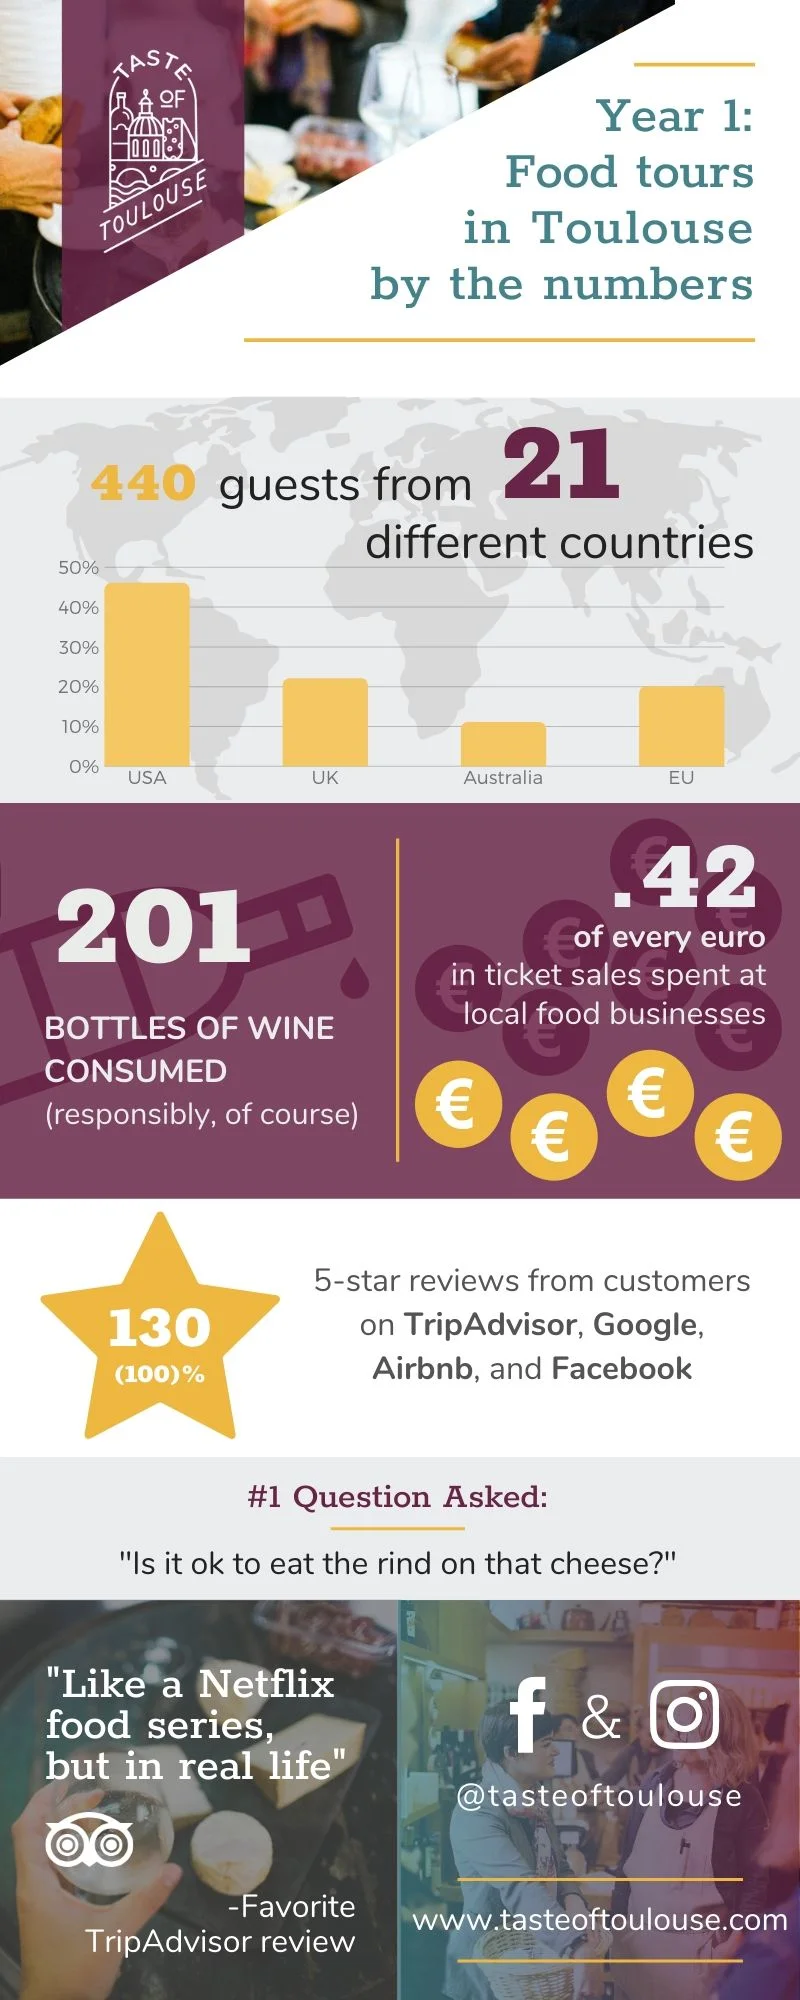 Year 1: Food tours in Toulouse by the numbers. 440 guests from 21 different countries. 201 bottles of wine consumed. 42 cents of every euro in ticket sales spent at local food businesses. 130 5-star reviews on TripAdvisor, Google, Airbnb, and Facebook. #1 question asked: "Is it ok to eat the rind on that cheese?" Favorite TripAdvisor review: "Like a Netflix food series, but in real life."